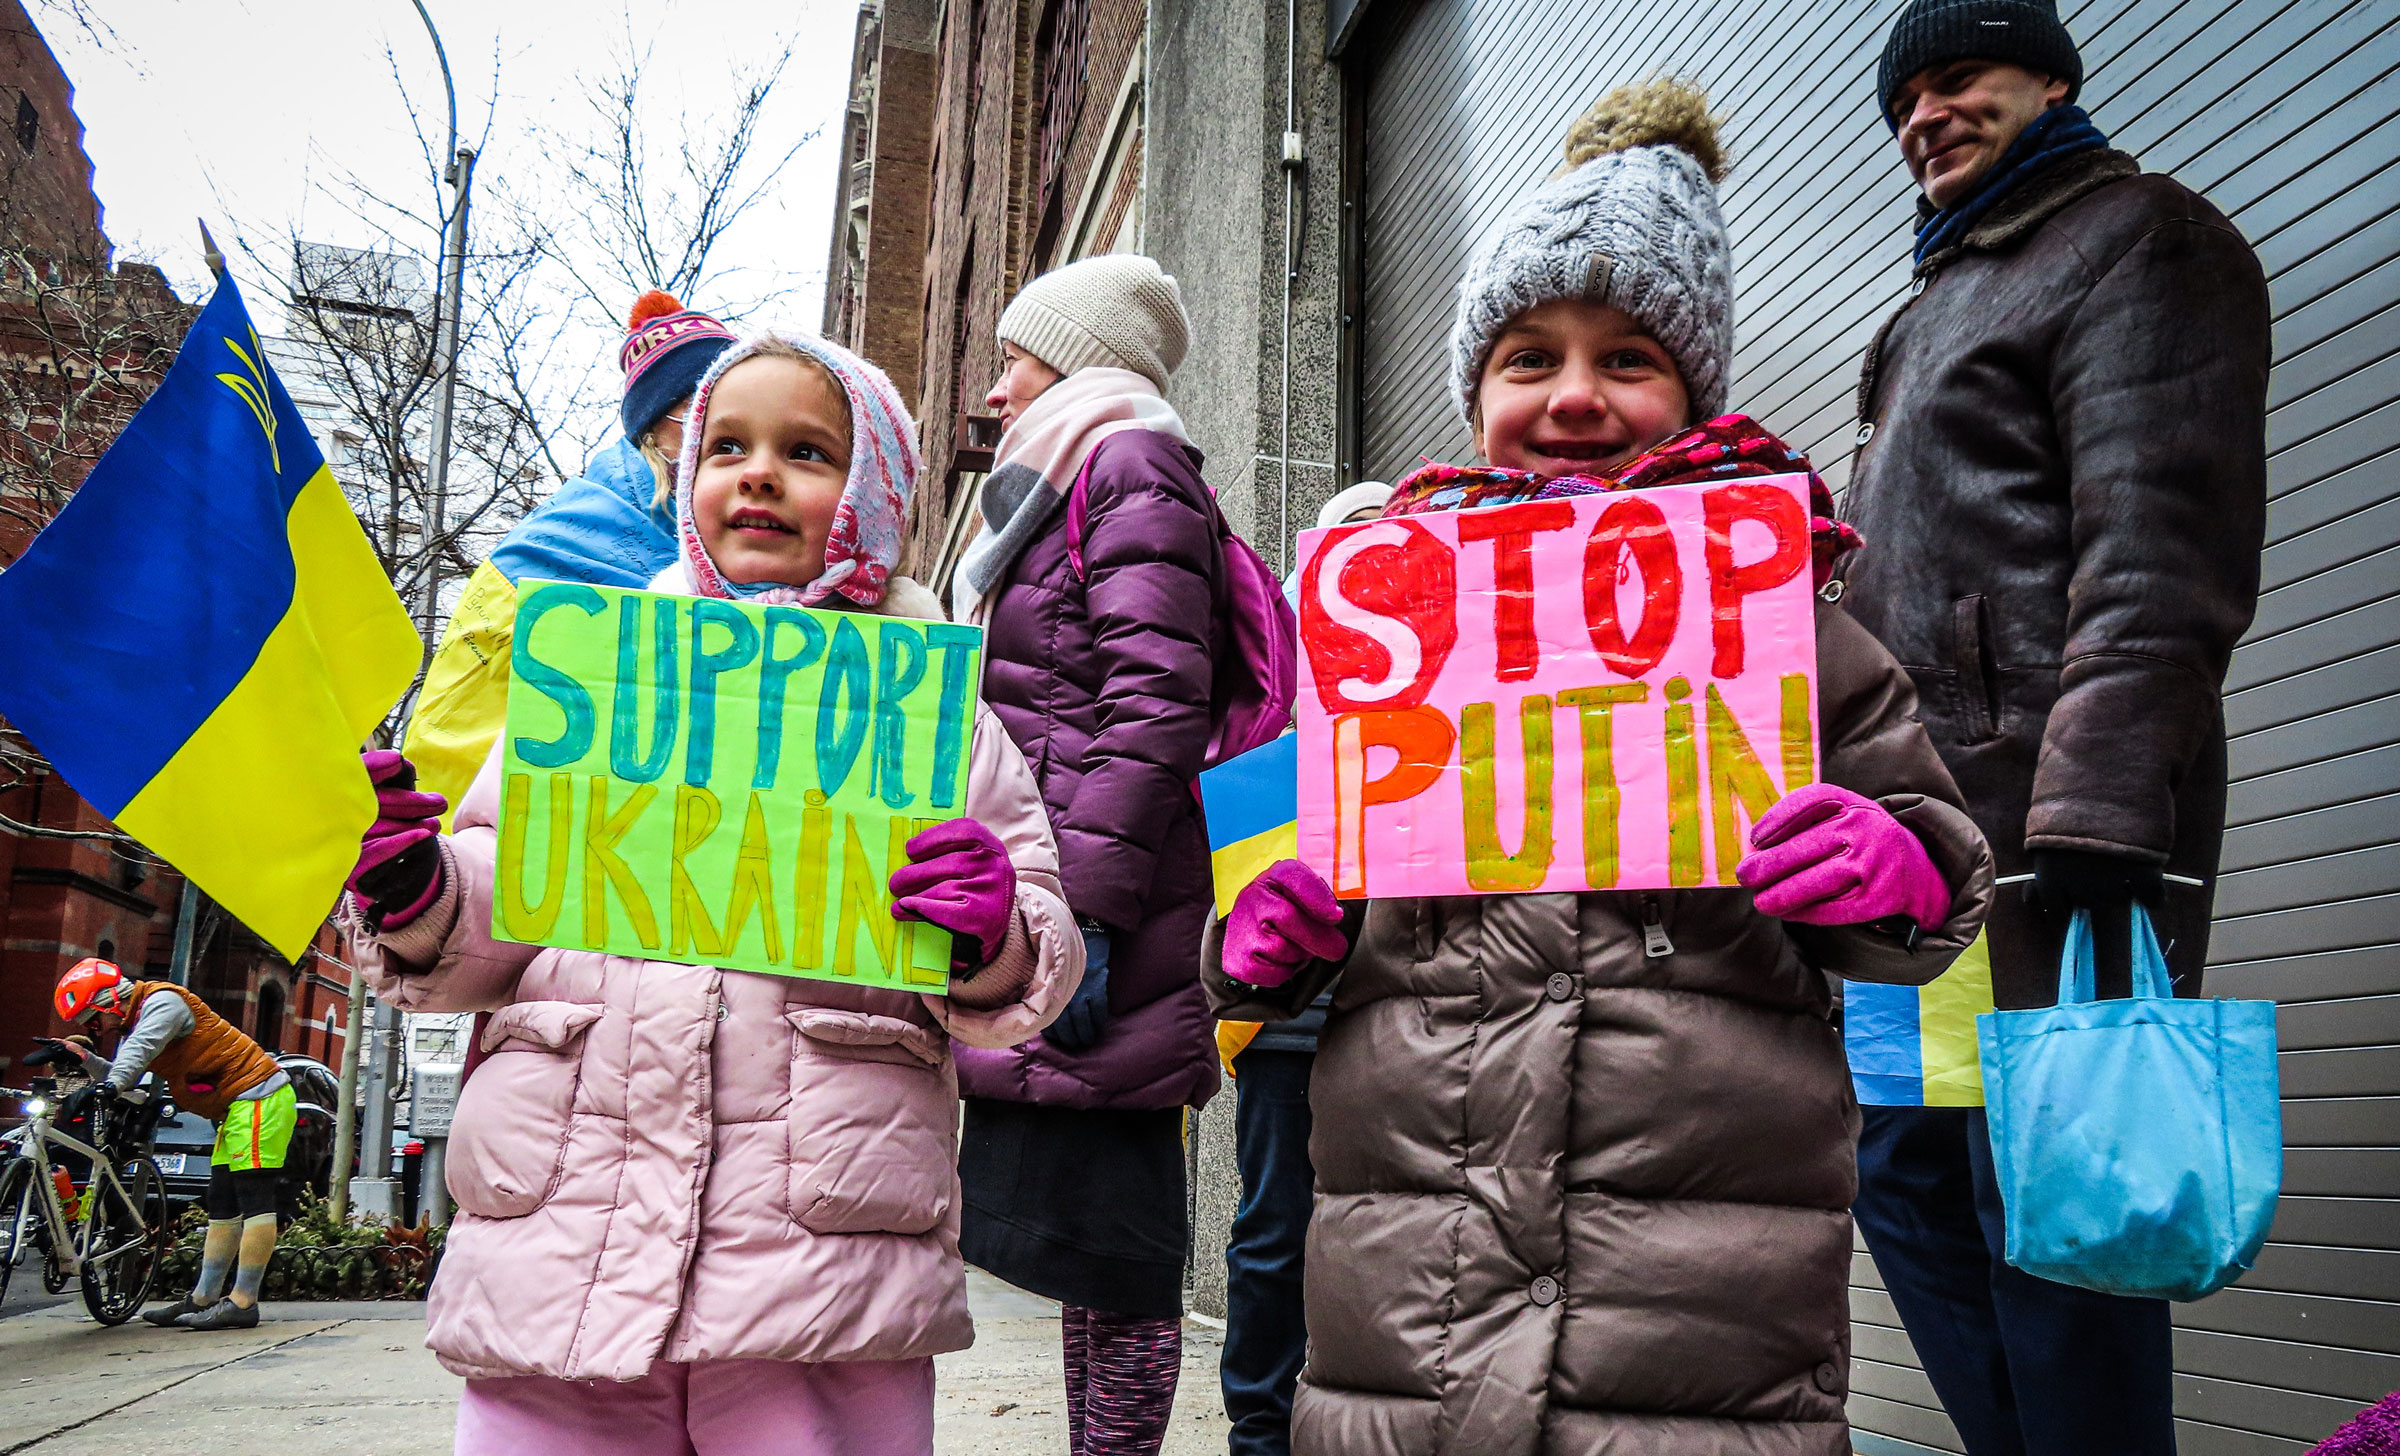 Children hold signs that say "Support Ukraine" and "Stop Putin."